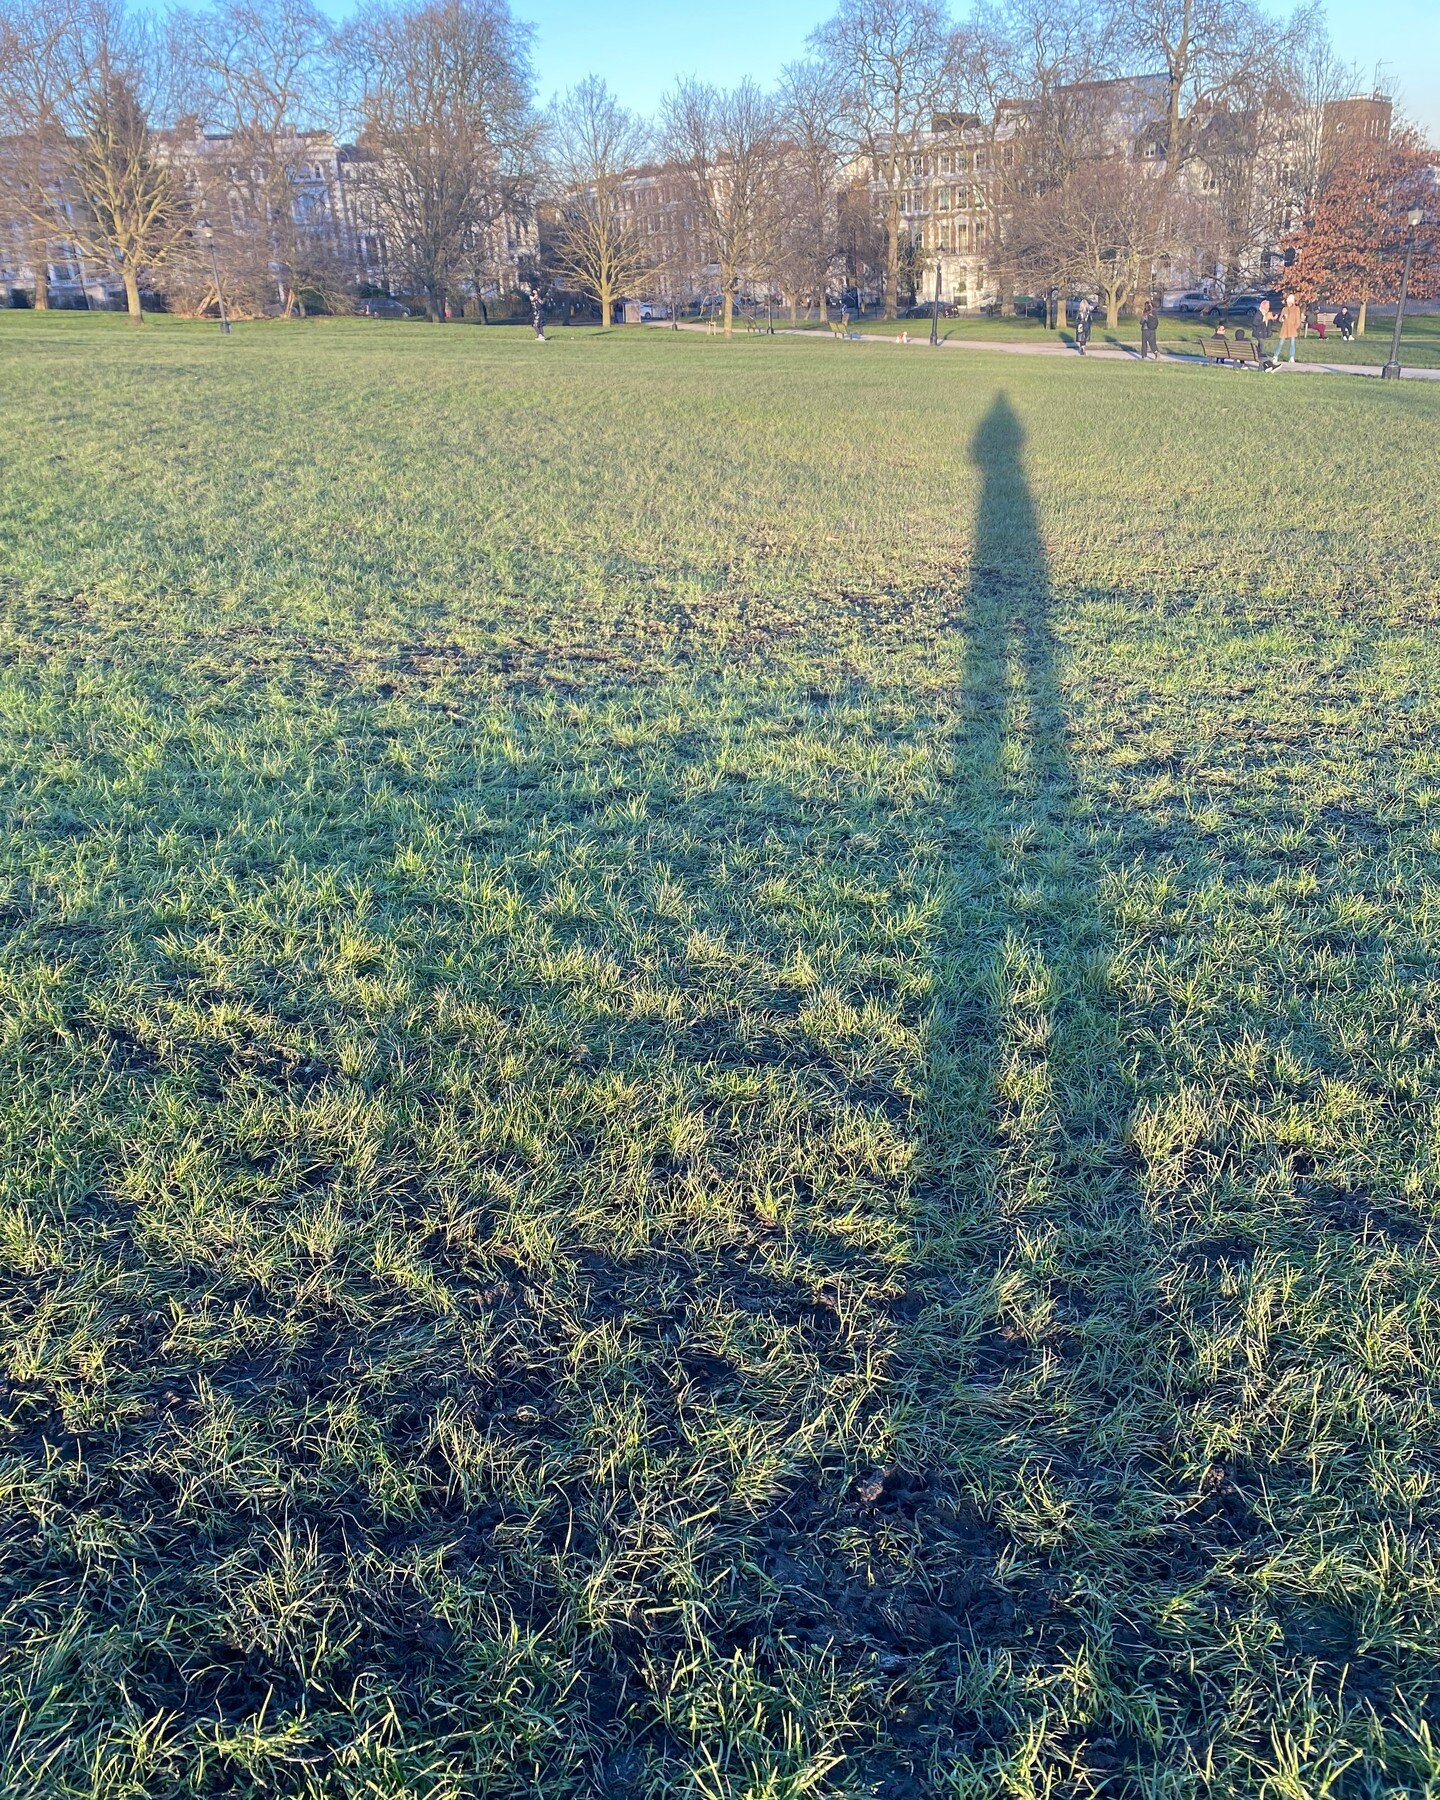 Short days, long shadows
.
After a resultful break and some time away, I am back in London and back to teaching. With the bitterly cold days we've had, I've aimed to incorporate some more dynamic, fluid movement into my practice and my classes. I've 